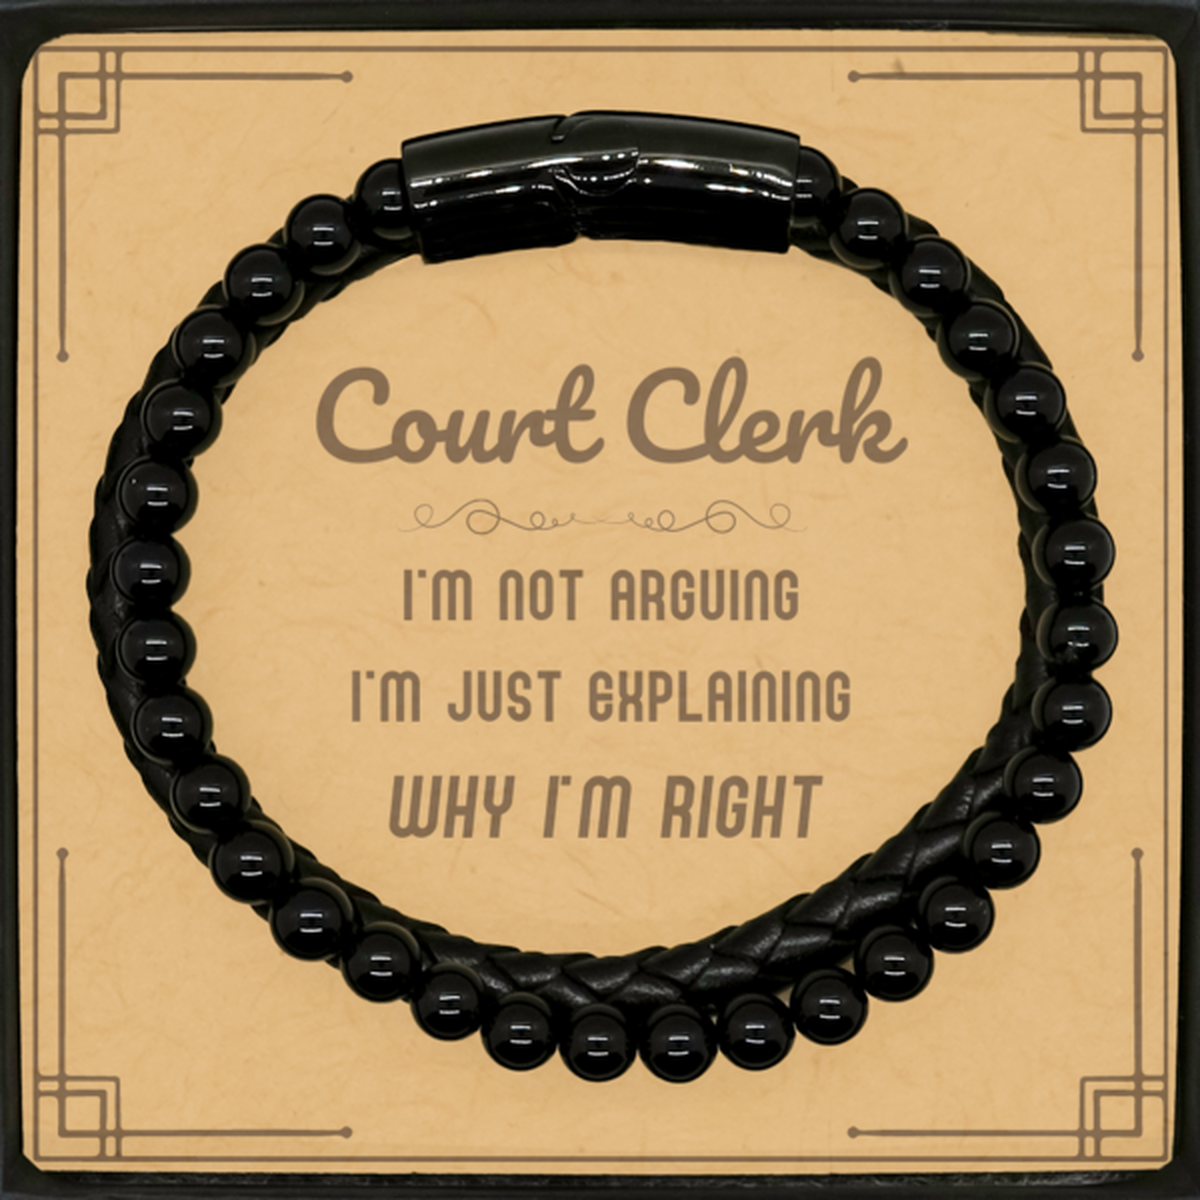 Court Clerk I'm not Arguing. I'm Just Explaining Why I'm RIGHT Stone Leather Bracelets, Funny Saying Quote Court Clerk Gifts For Court Clerk Message Card Graduation Birthday Christmas Gifts for Men Women Coworker